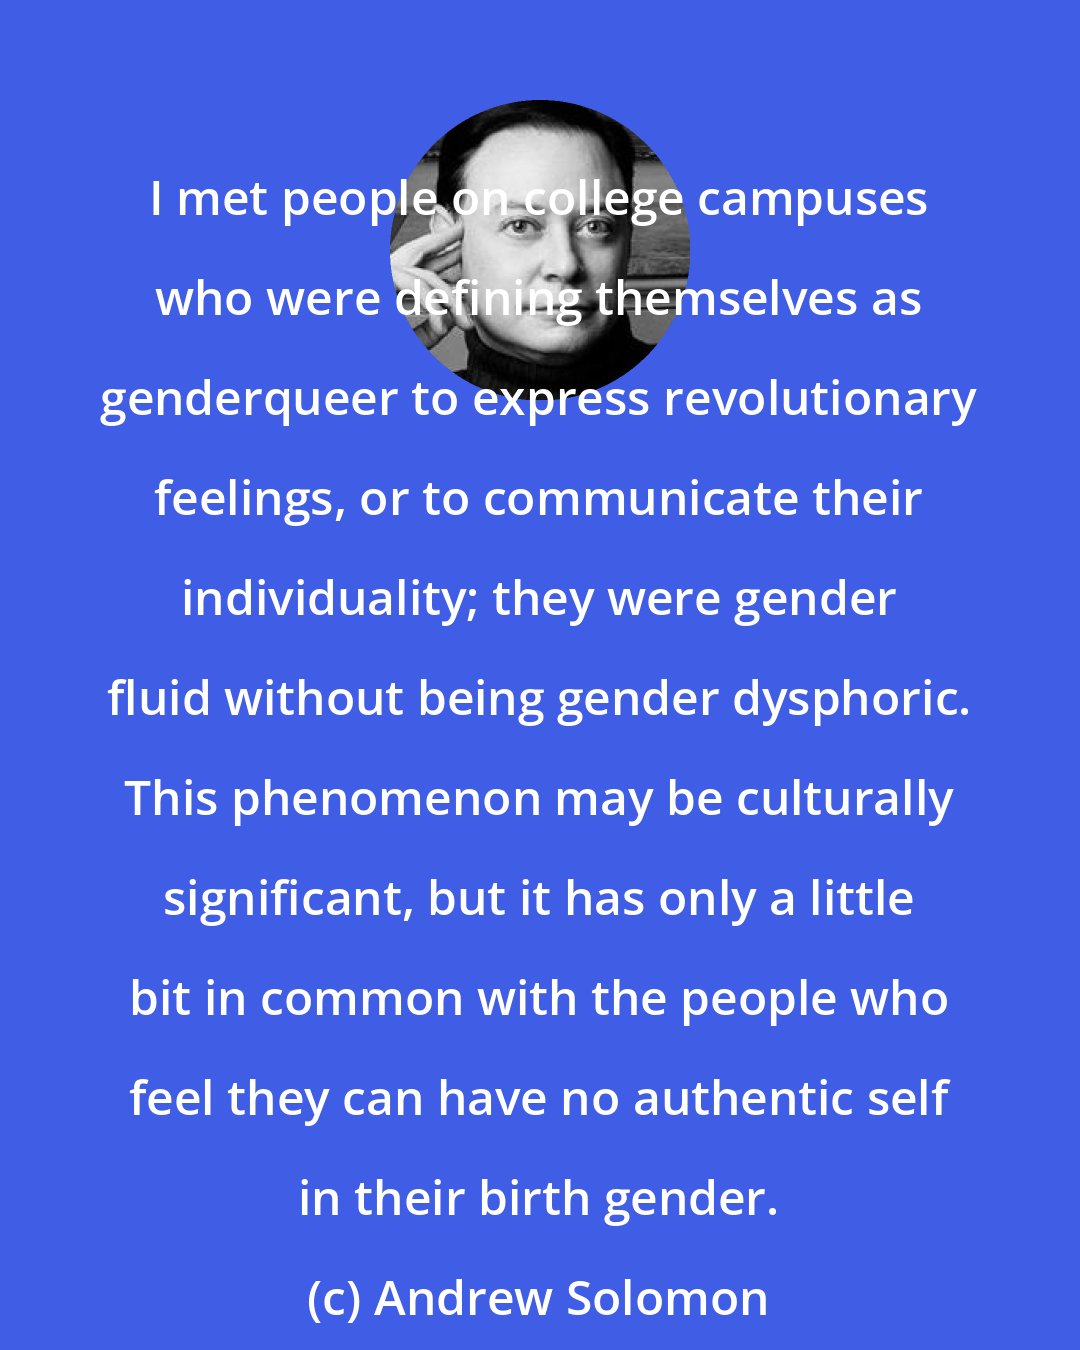 Andrew Solomon: I met people on college campuses who were defining themselves as genderqueer to express revolutionary feelings, or to communicate their individuality; they were gender fluid without being gender dysphoric. This phenomenon may be culturally significant, but it has only a little bit in common with the people who feel they can have no authentic self in their birth gender.